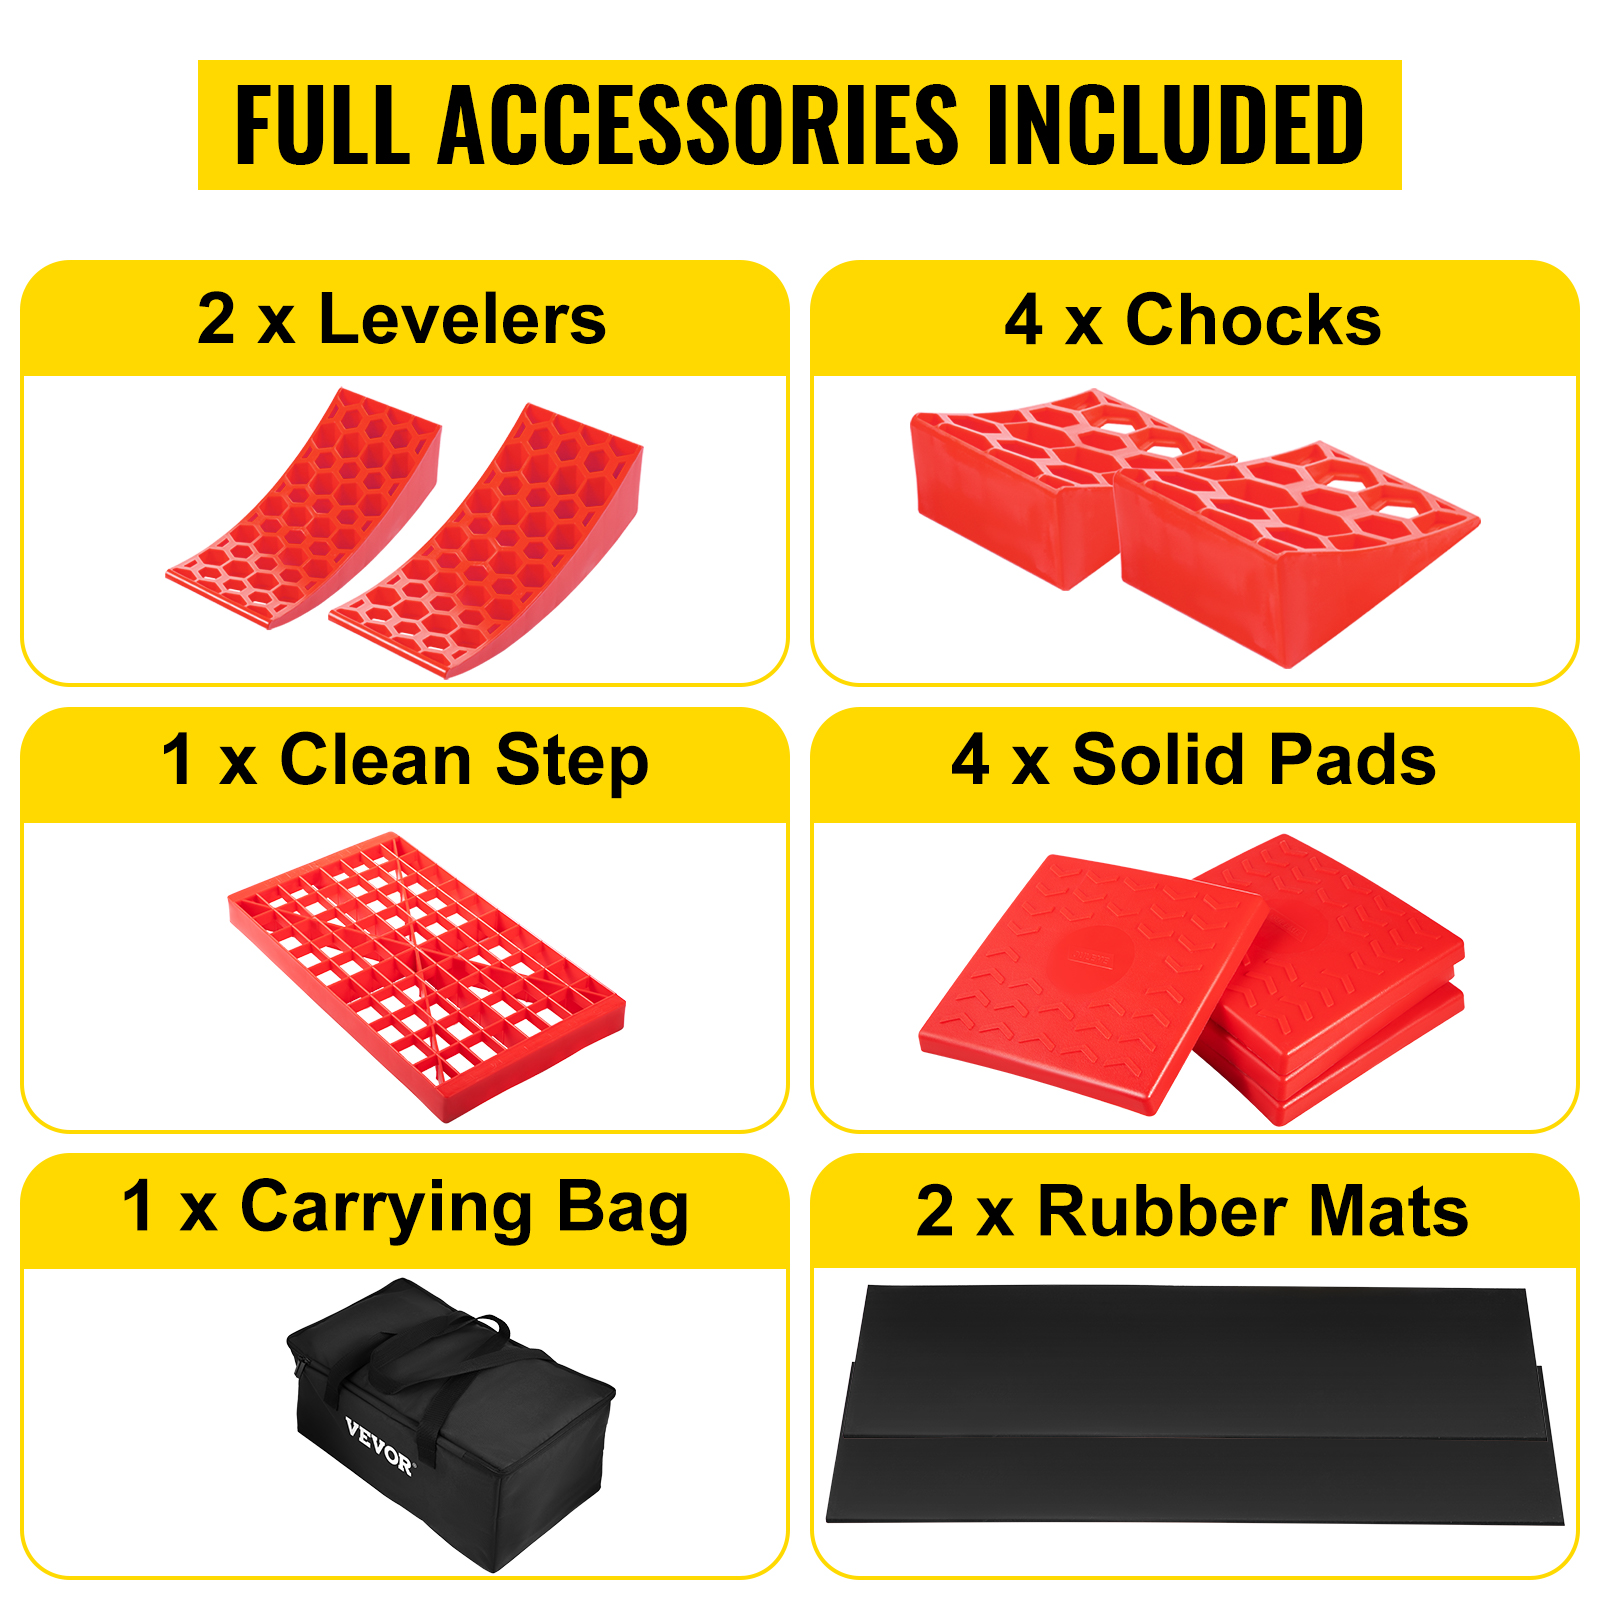 JIMIYA Heavy Duty Camper Leveler for RV Trailer Campers RV Leveling Blocks Chock Kit with Two Curved Levelers Two Chocks Two Rubber Mats and Carry Bag 